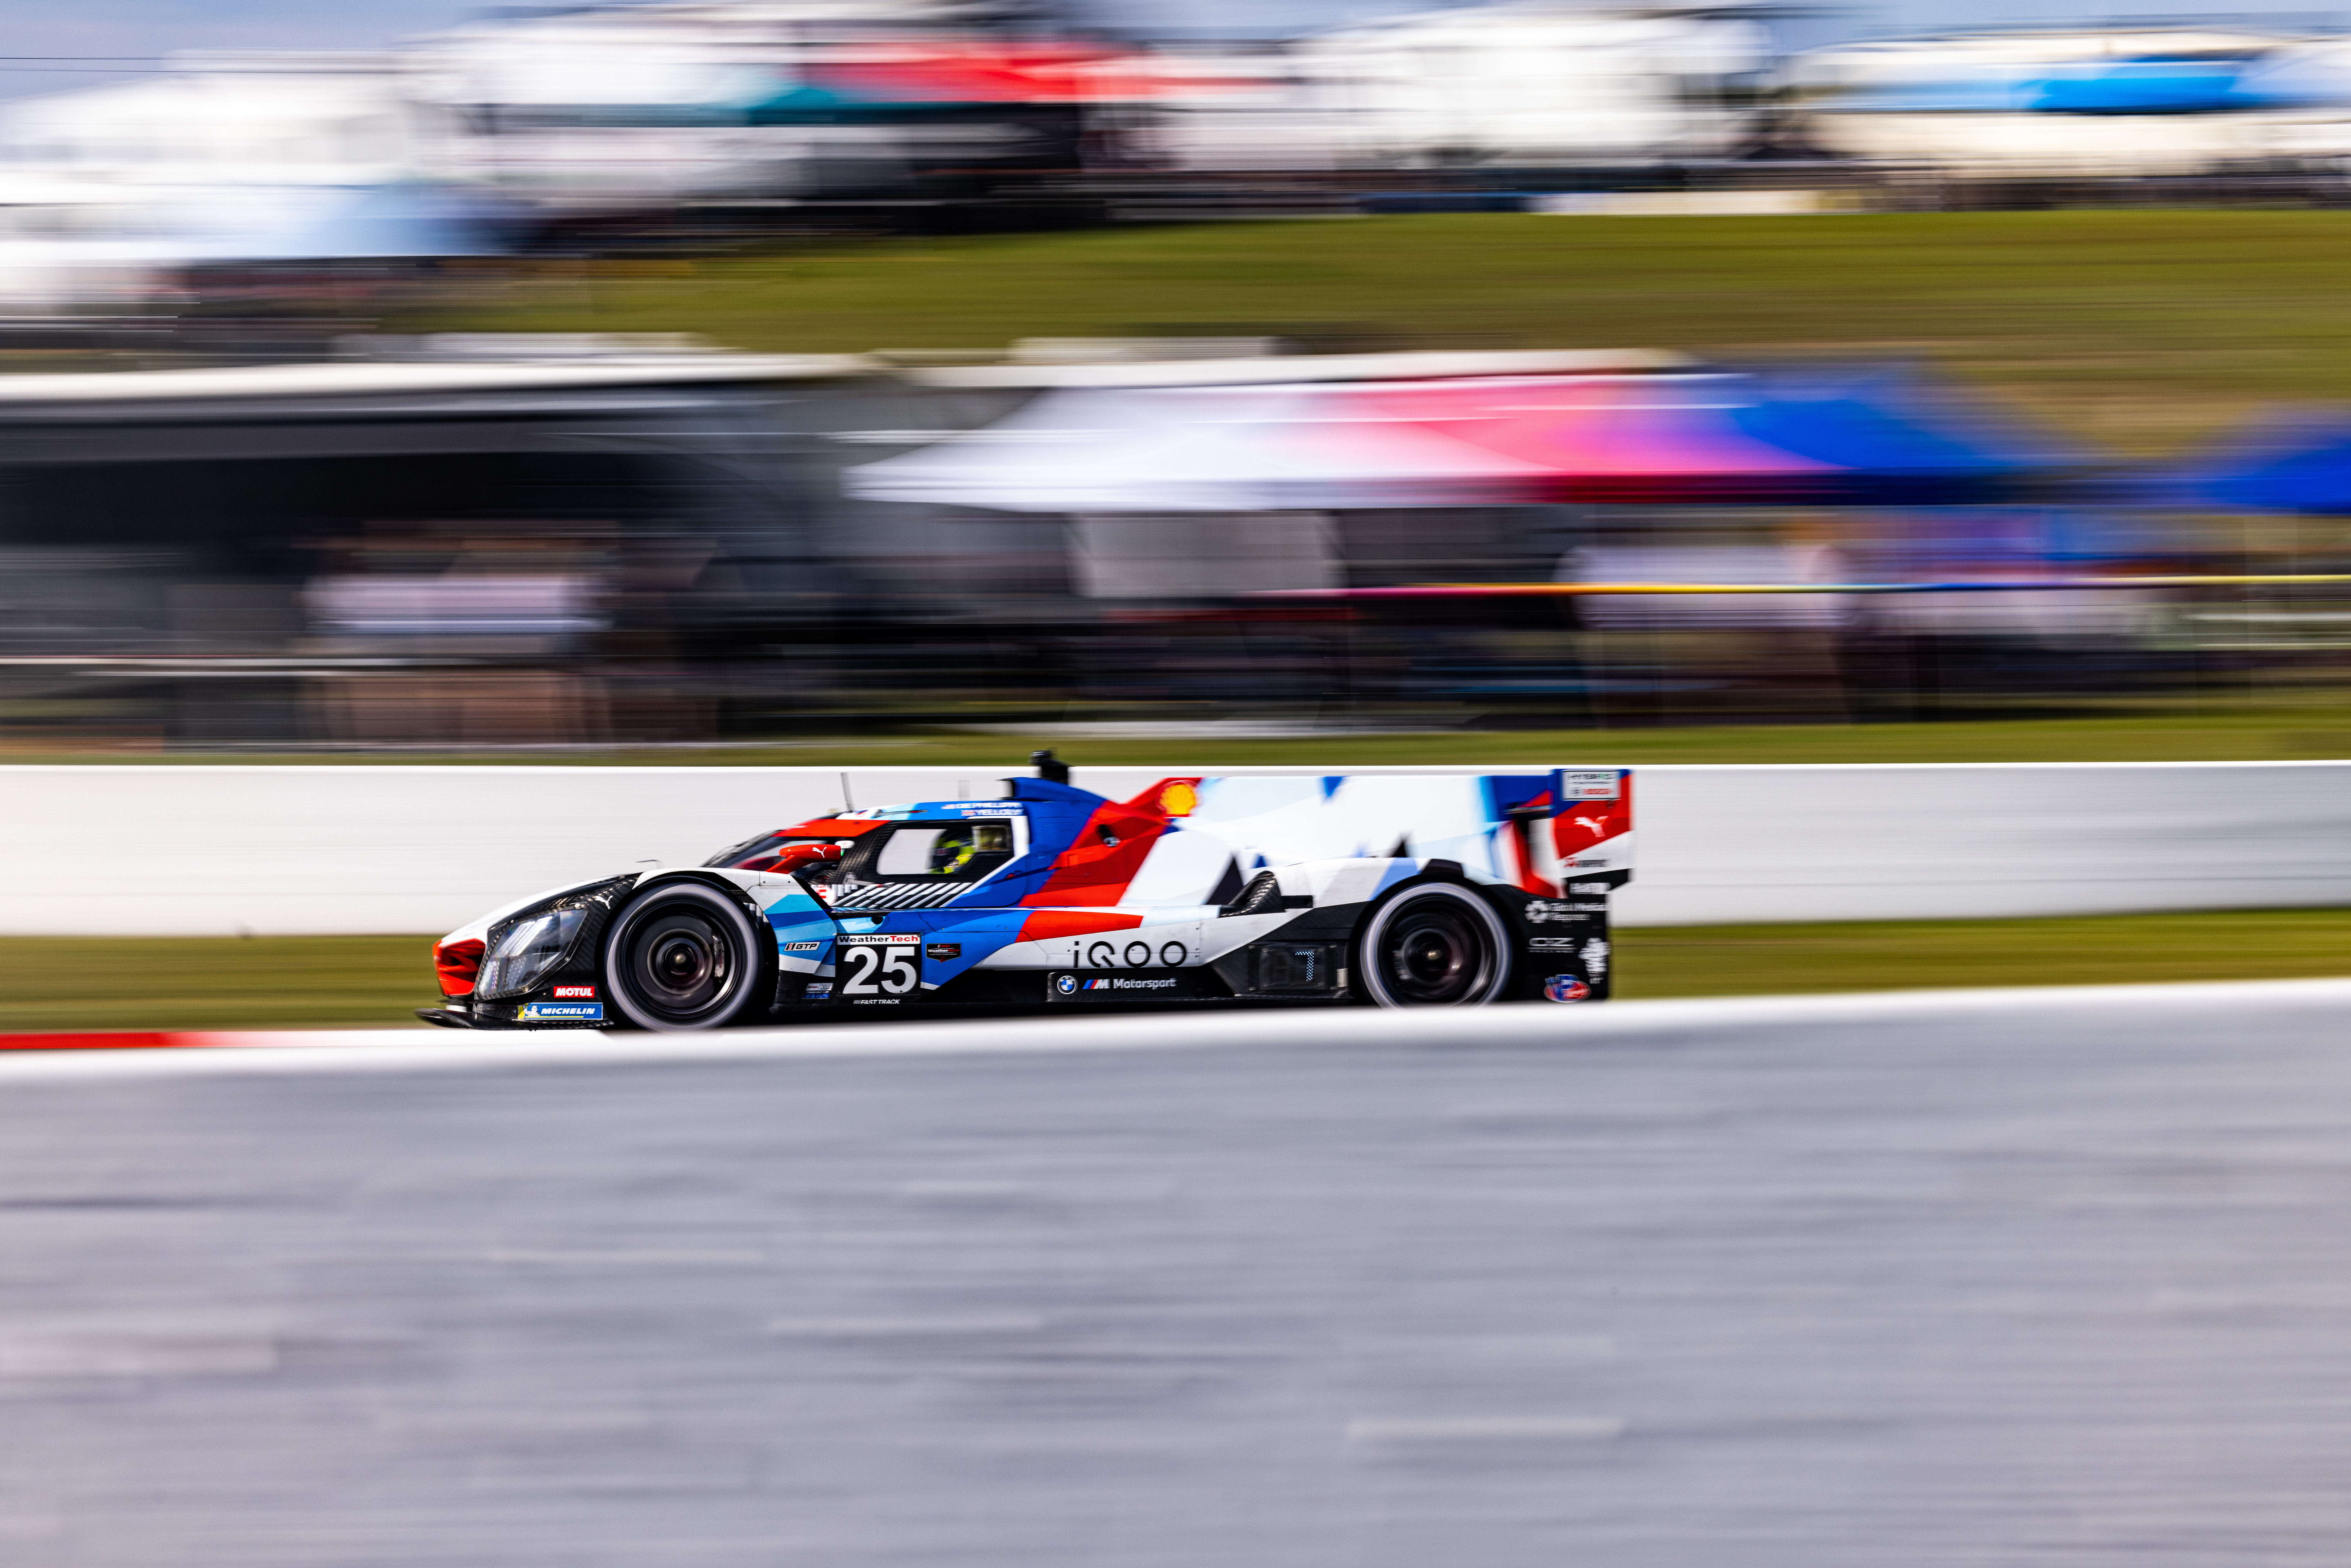 IMSA at Road America: BMW M Team RLL aiming for third consecutive GTP podium with the new BMW M Hybrid V8.